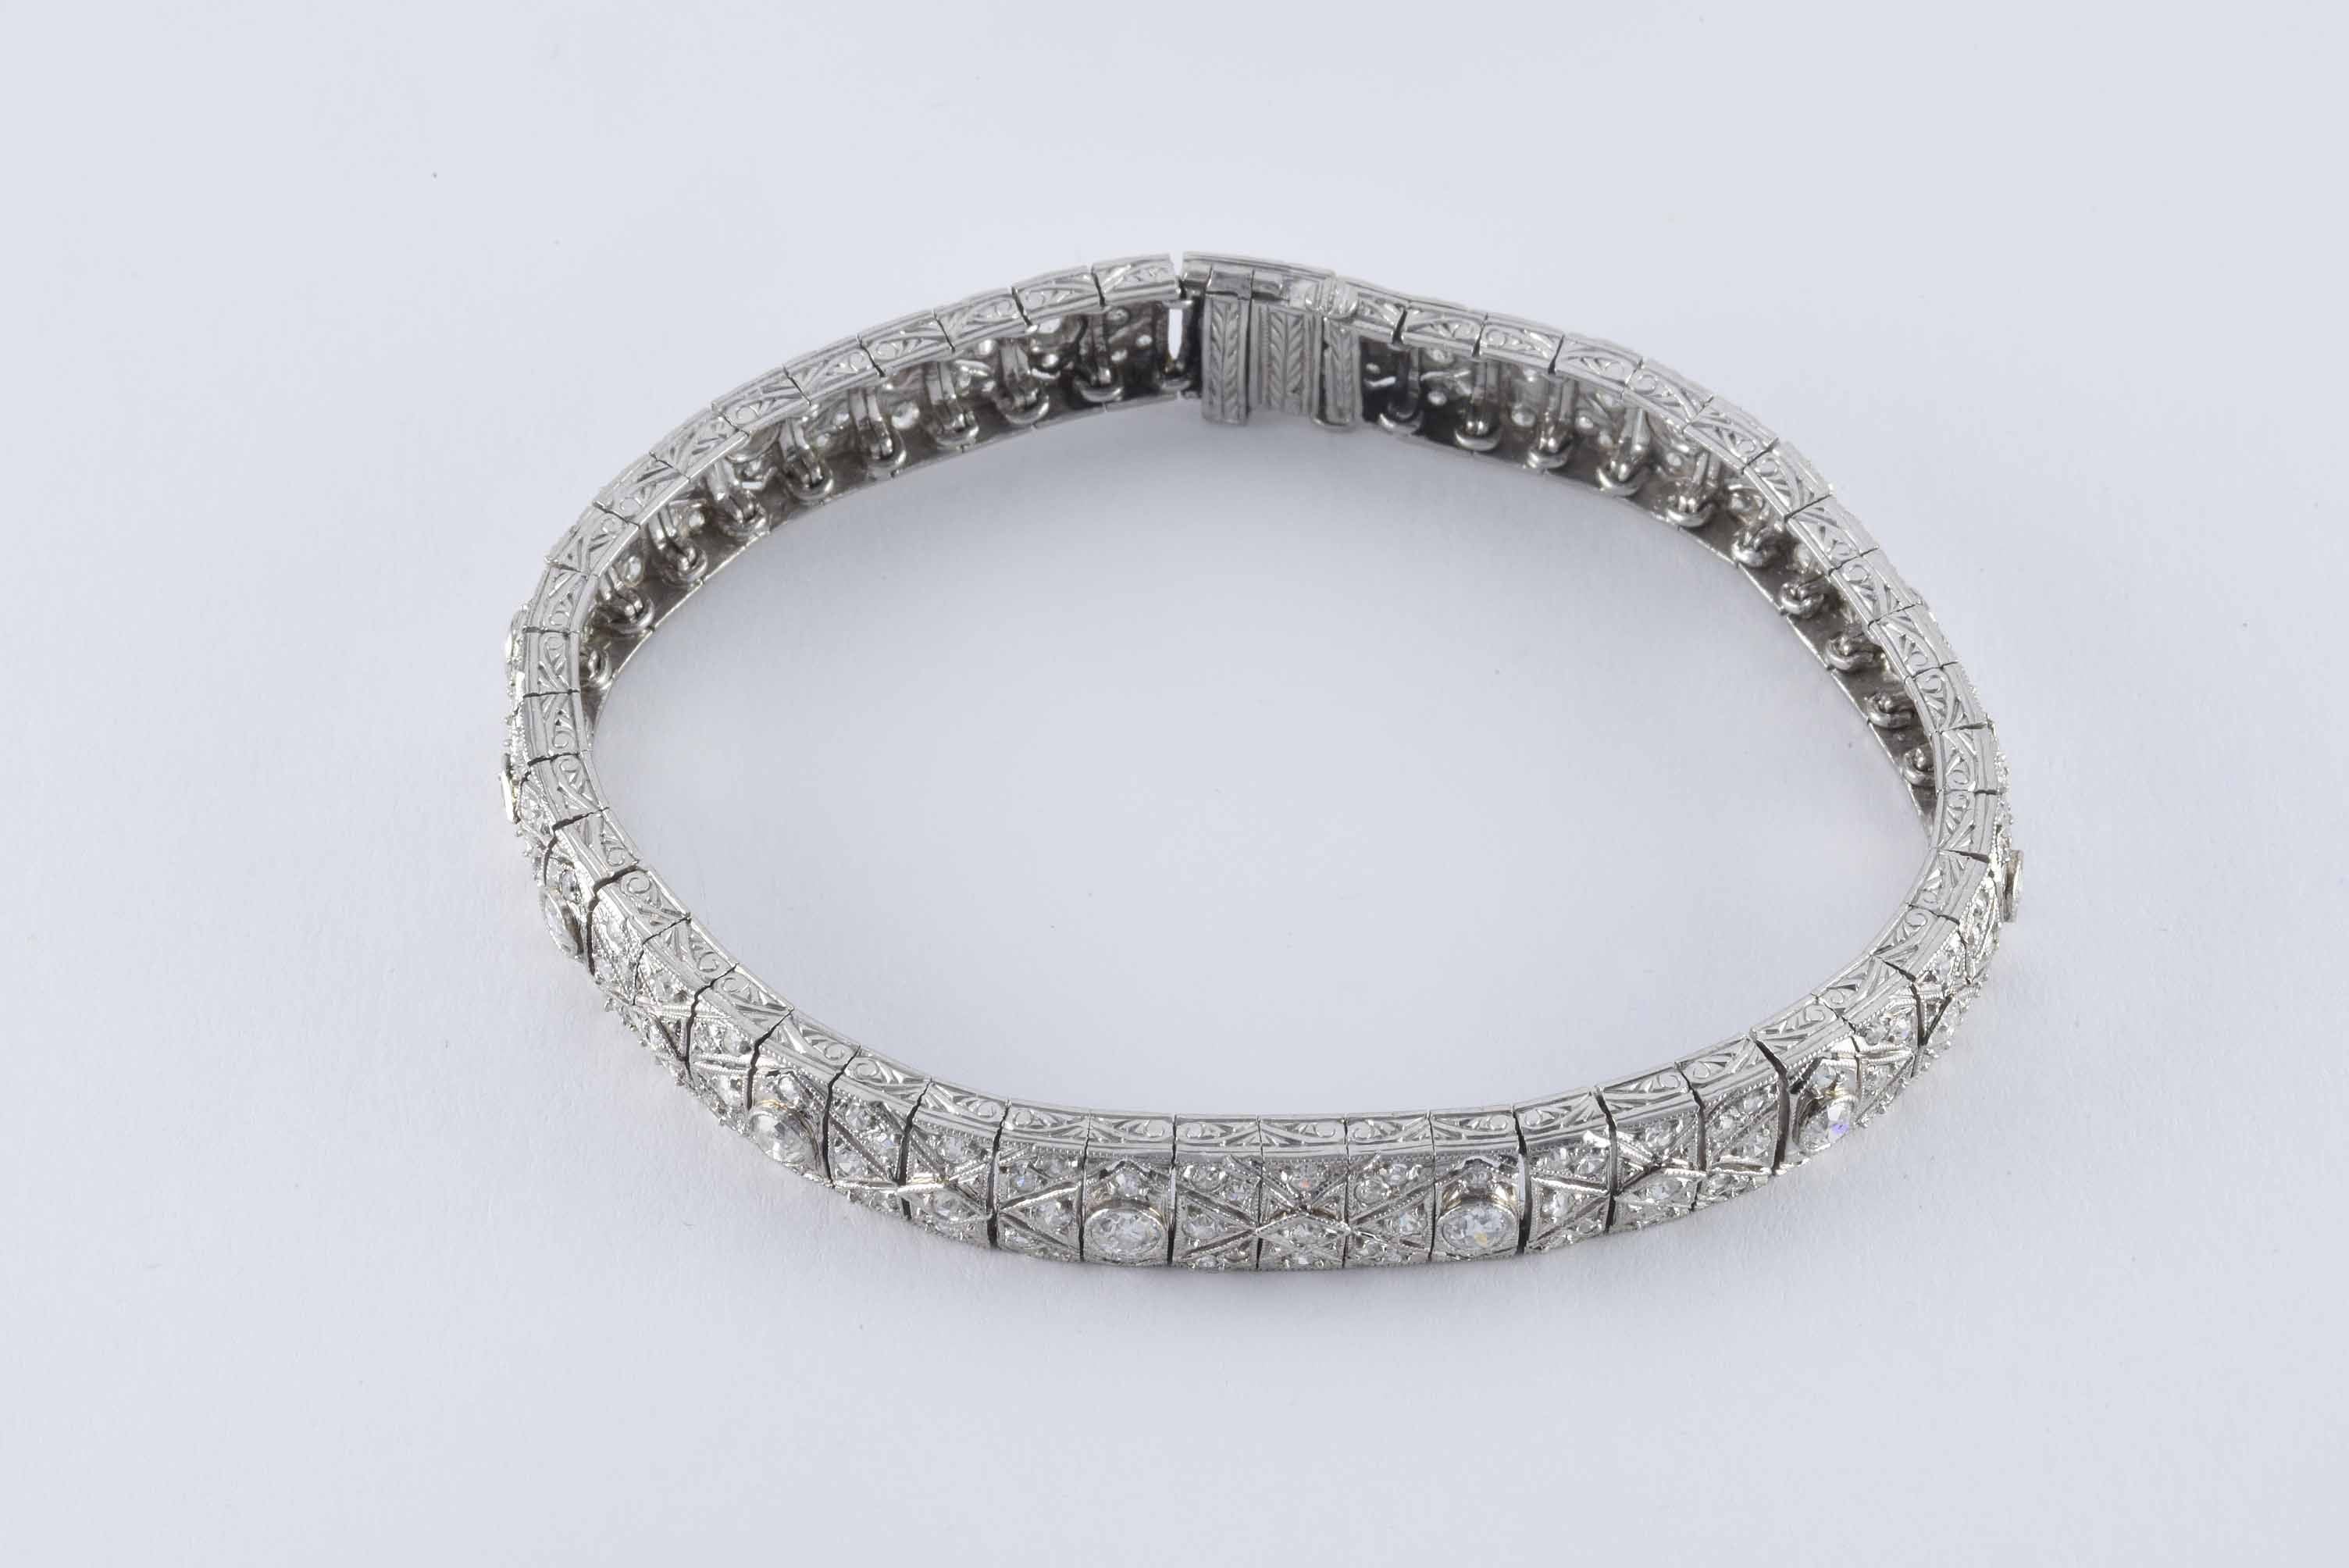 This classic Art Deco link bracelet is designed around twelve Old European cut diamonds totaling approximately 1.80 carats and embellished with 180 single cut diamonds totaling approximately 3.26 carats, G-H color, VS-SI clarity in geometric